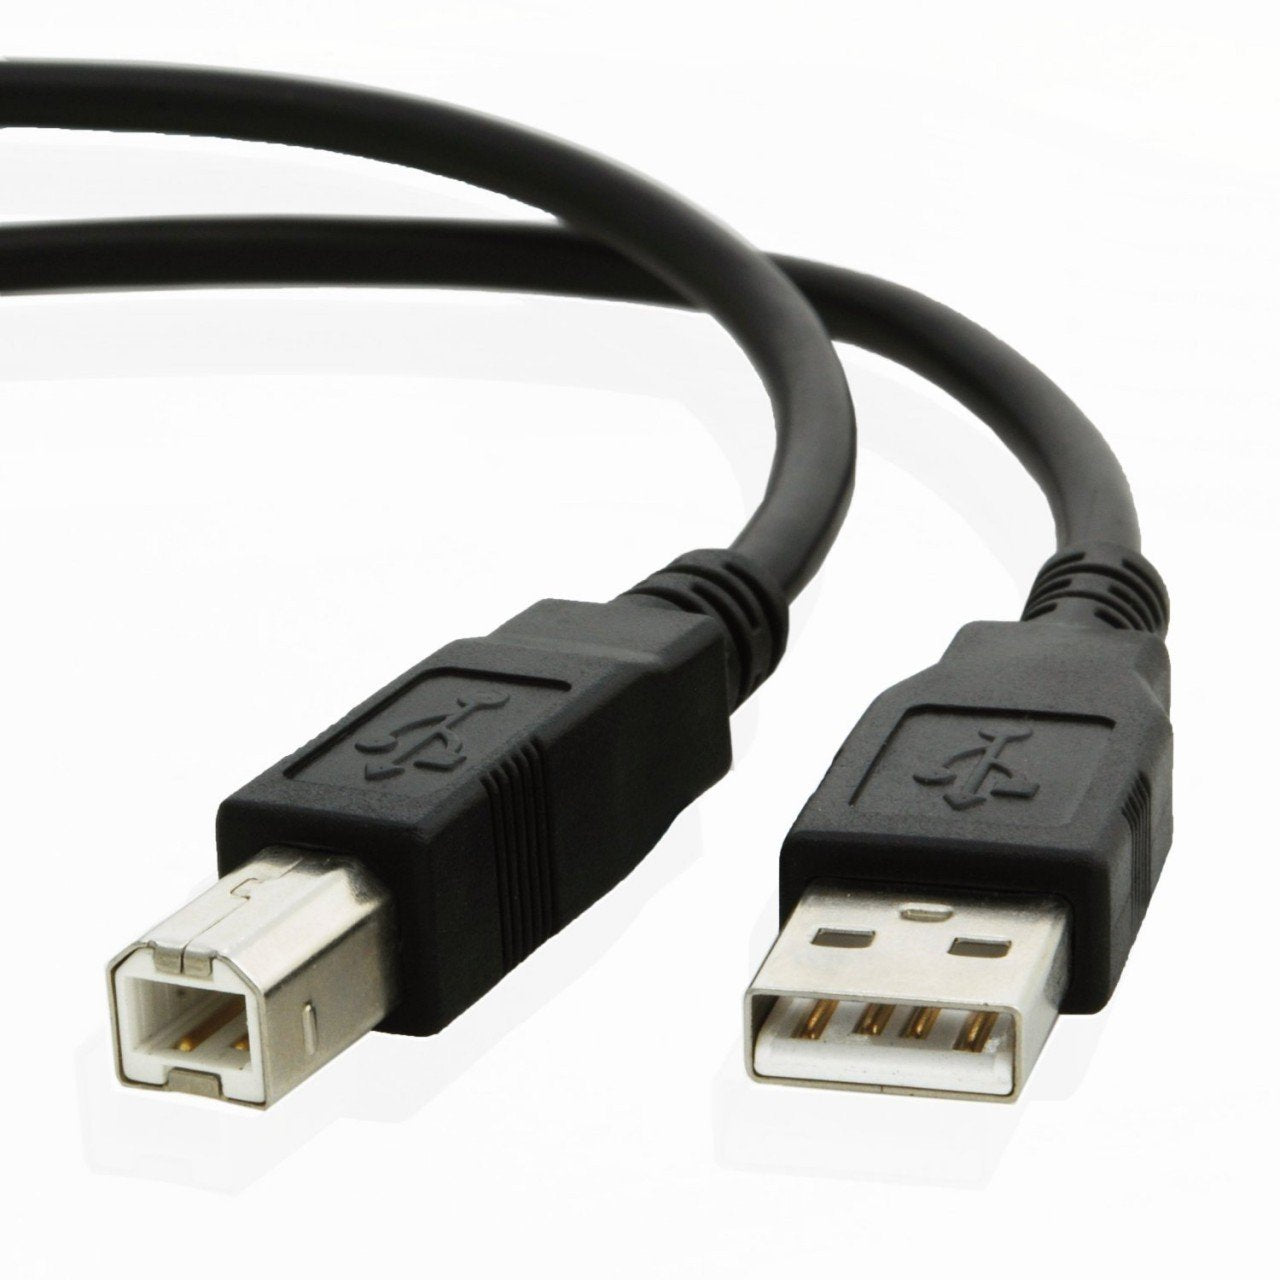 USB cable for Canon PIXMA MG2550